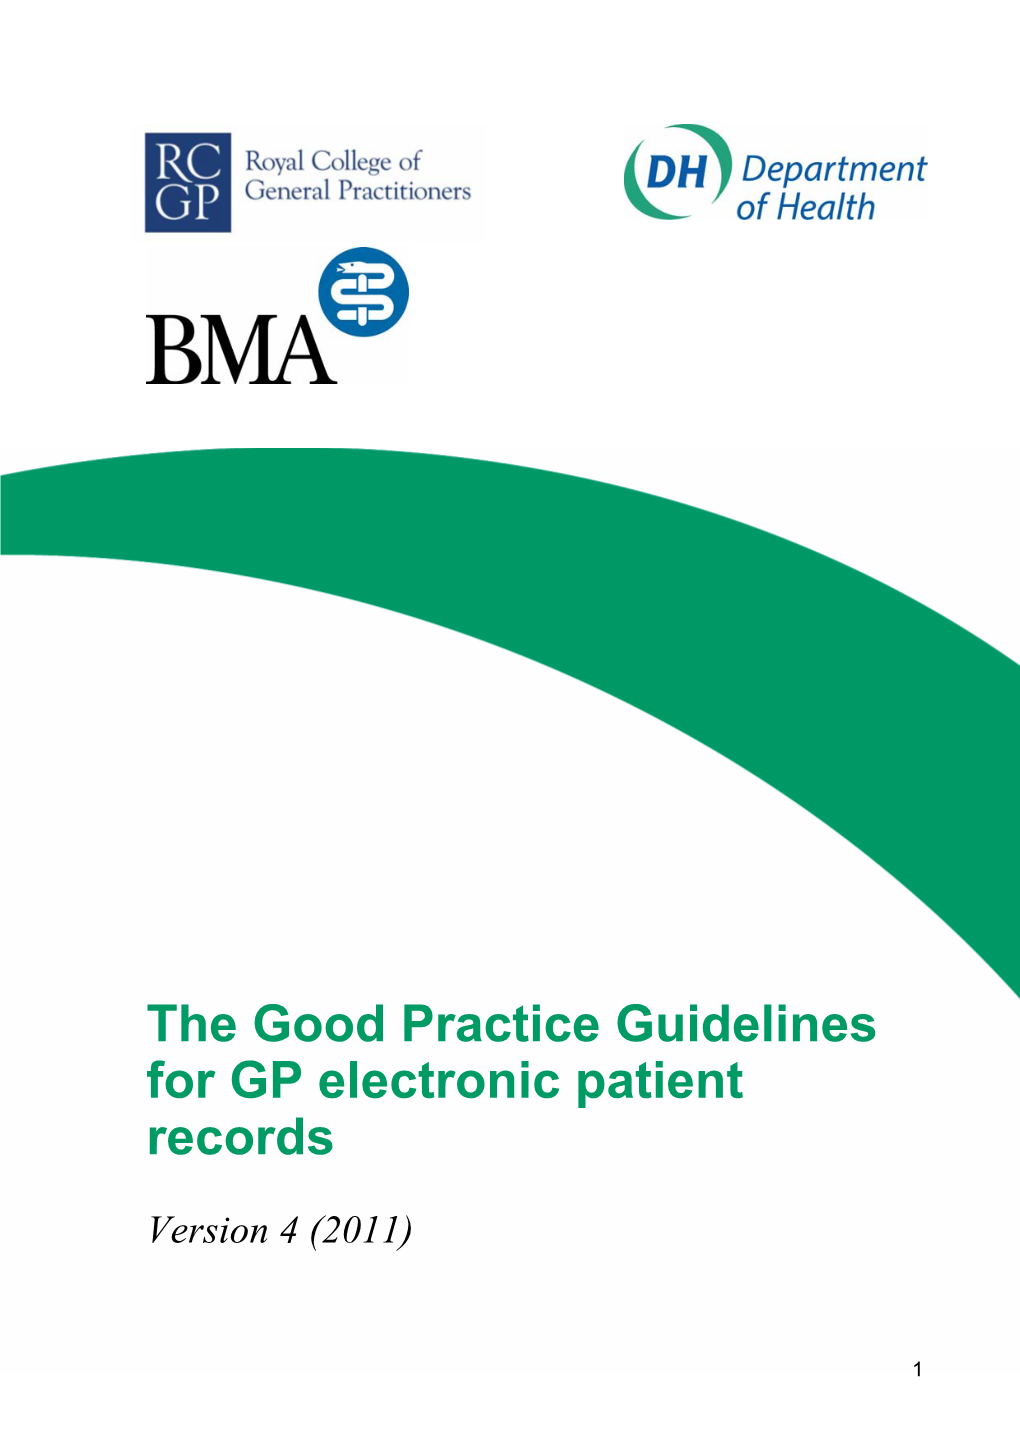 Good Practice Guidelines for GP Electronic Patient Records